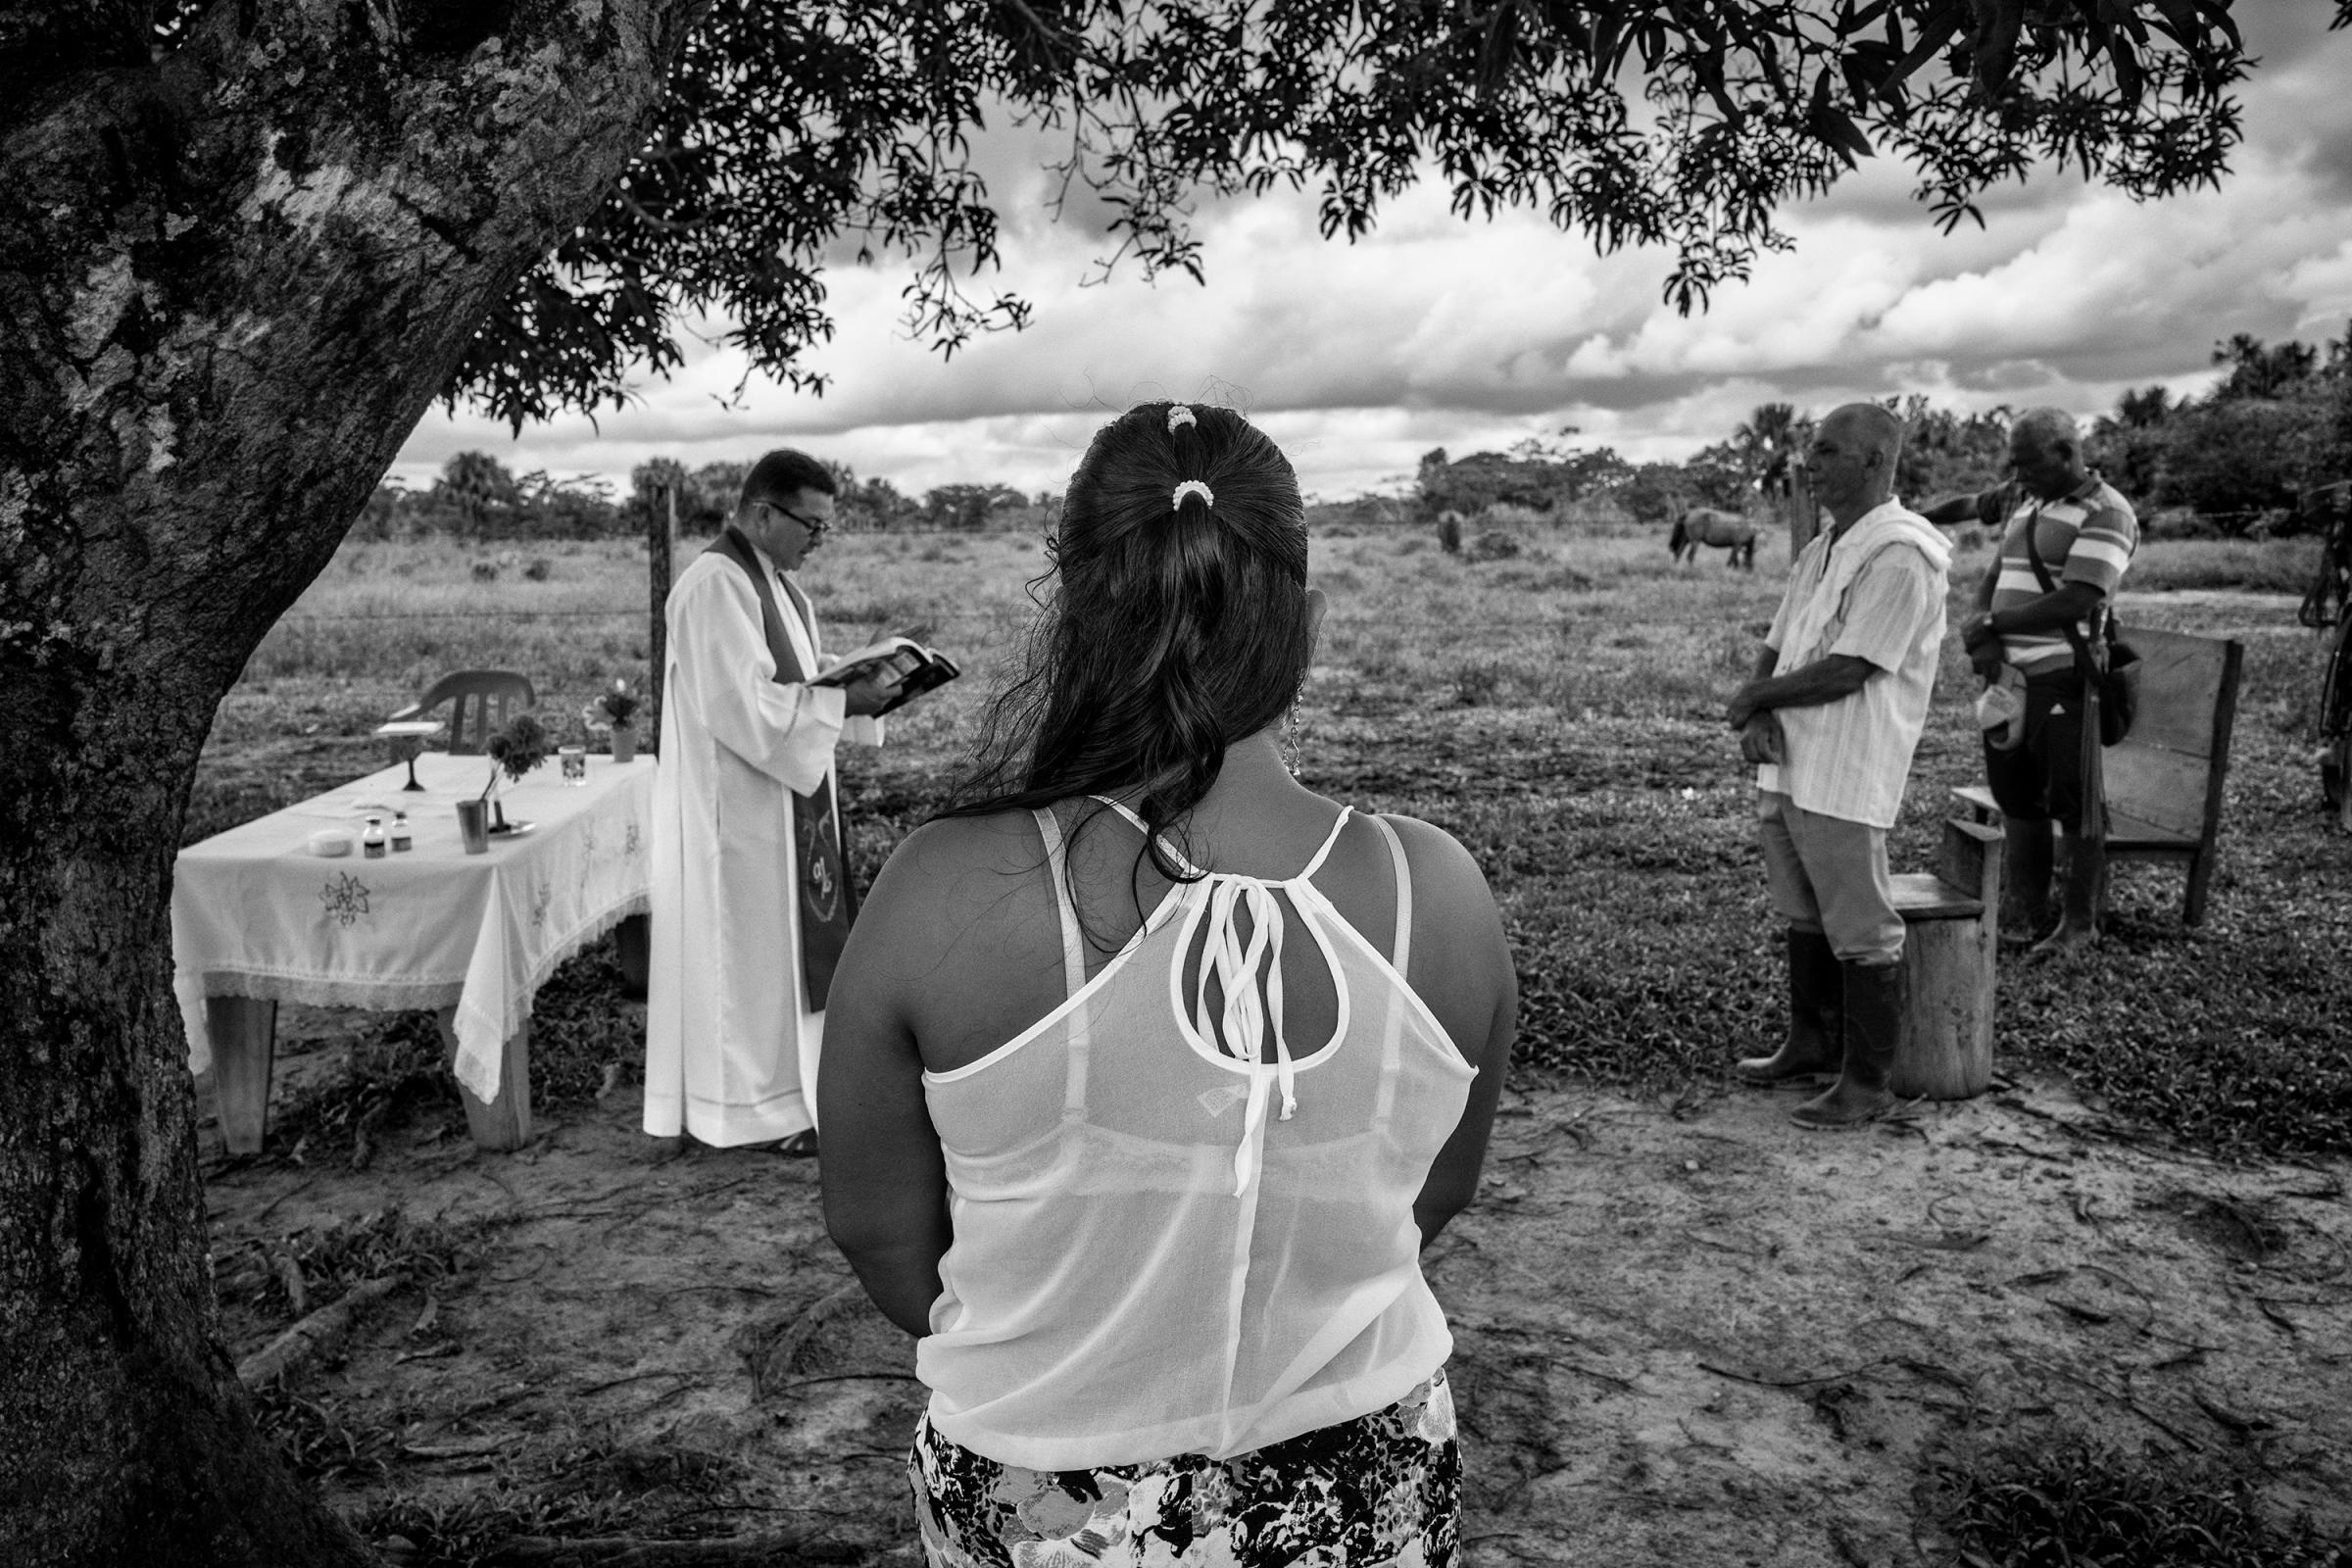 A group of civilians attend a Catholic Mass in the community of Puerto Camelias del Caguan. Both religion and FARC play central roles in communities where FARC has been the only authority for over 50 years, Aug. 24, 2016